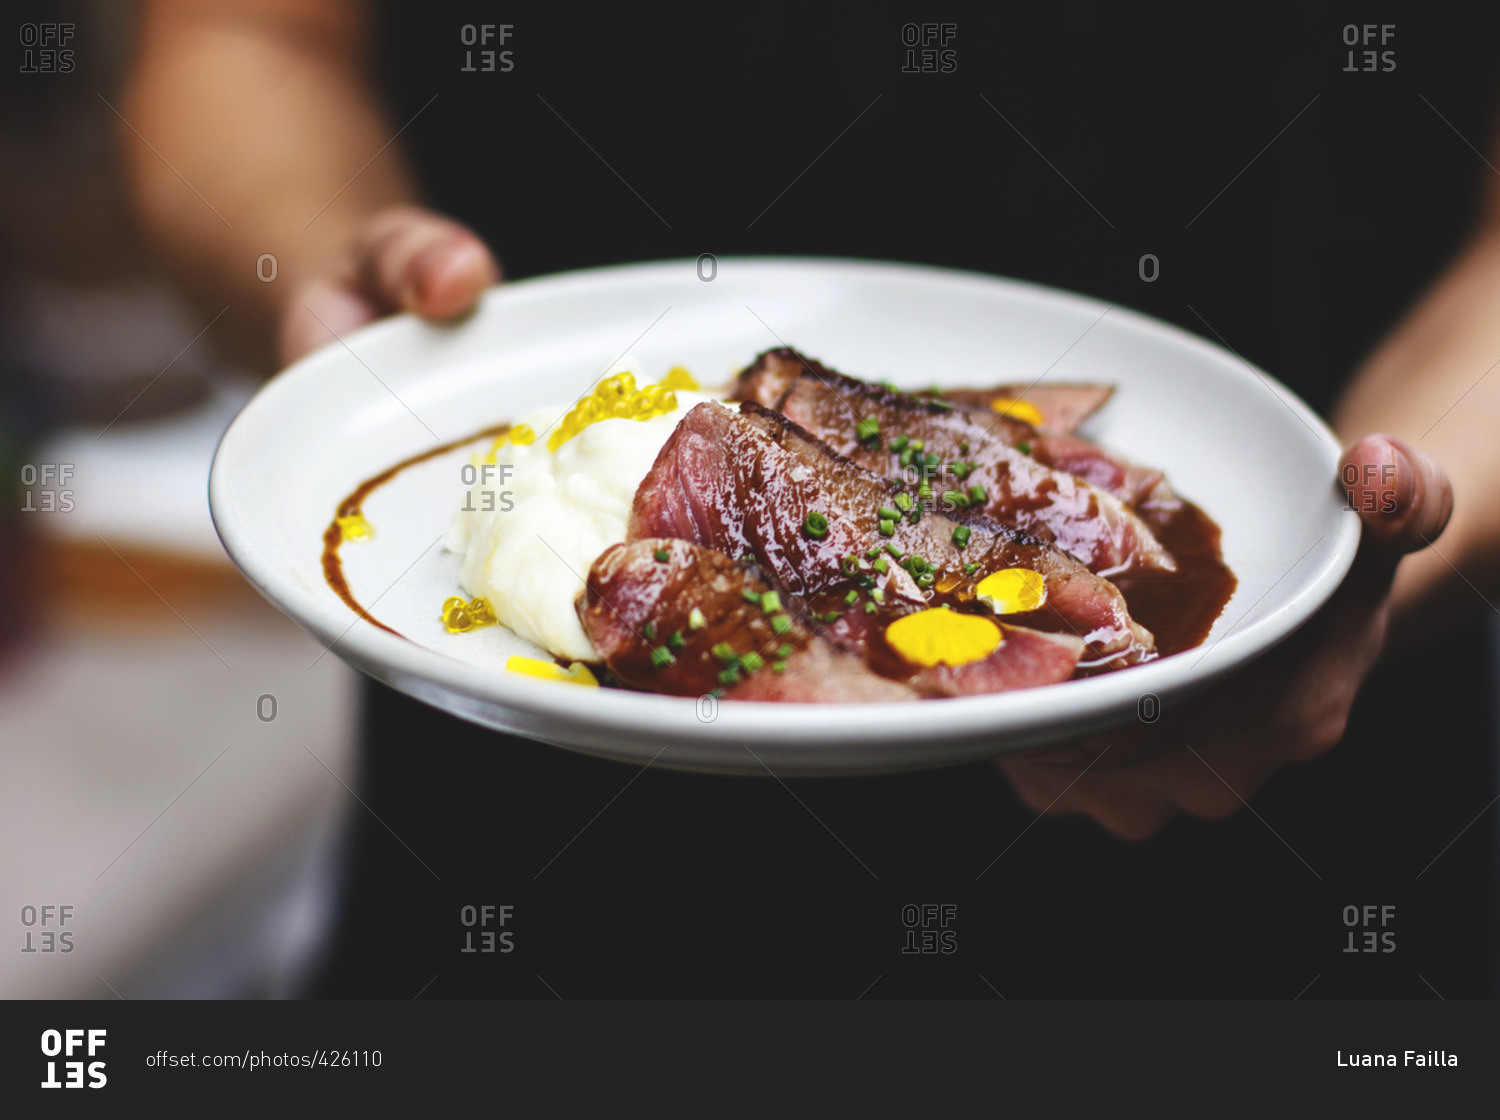 Server holding a plate with sliced rare beef and potatoes